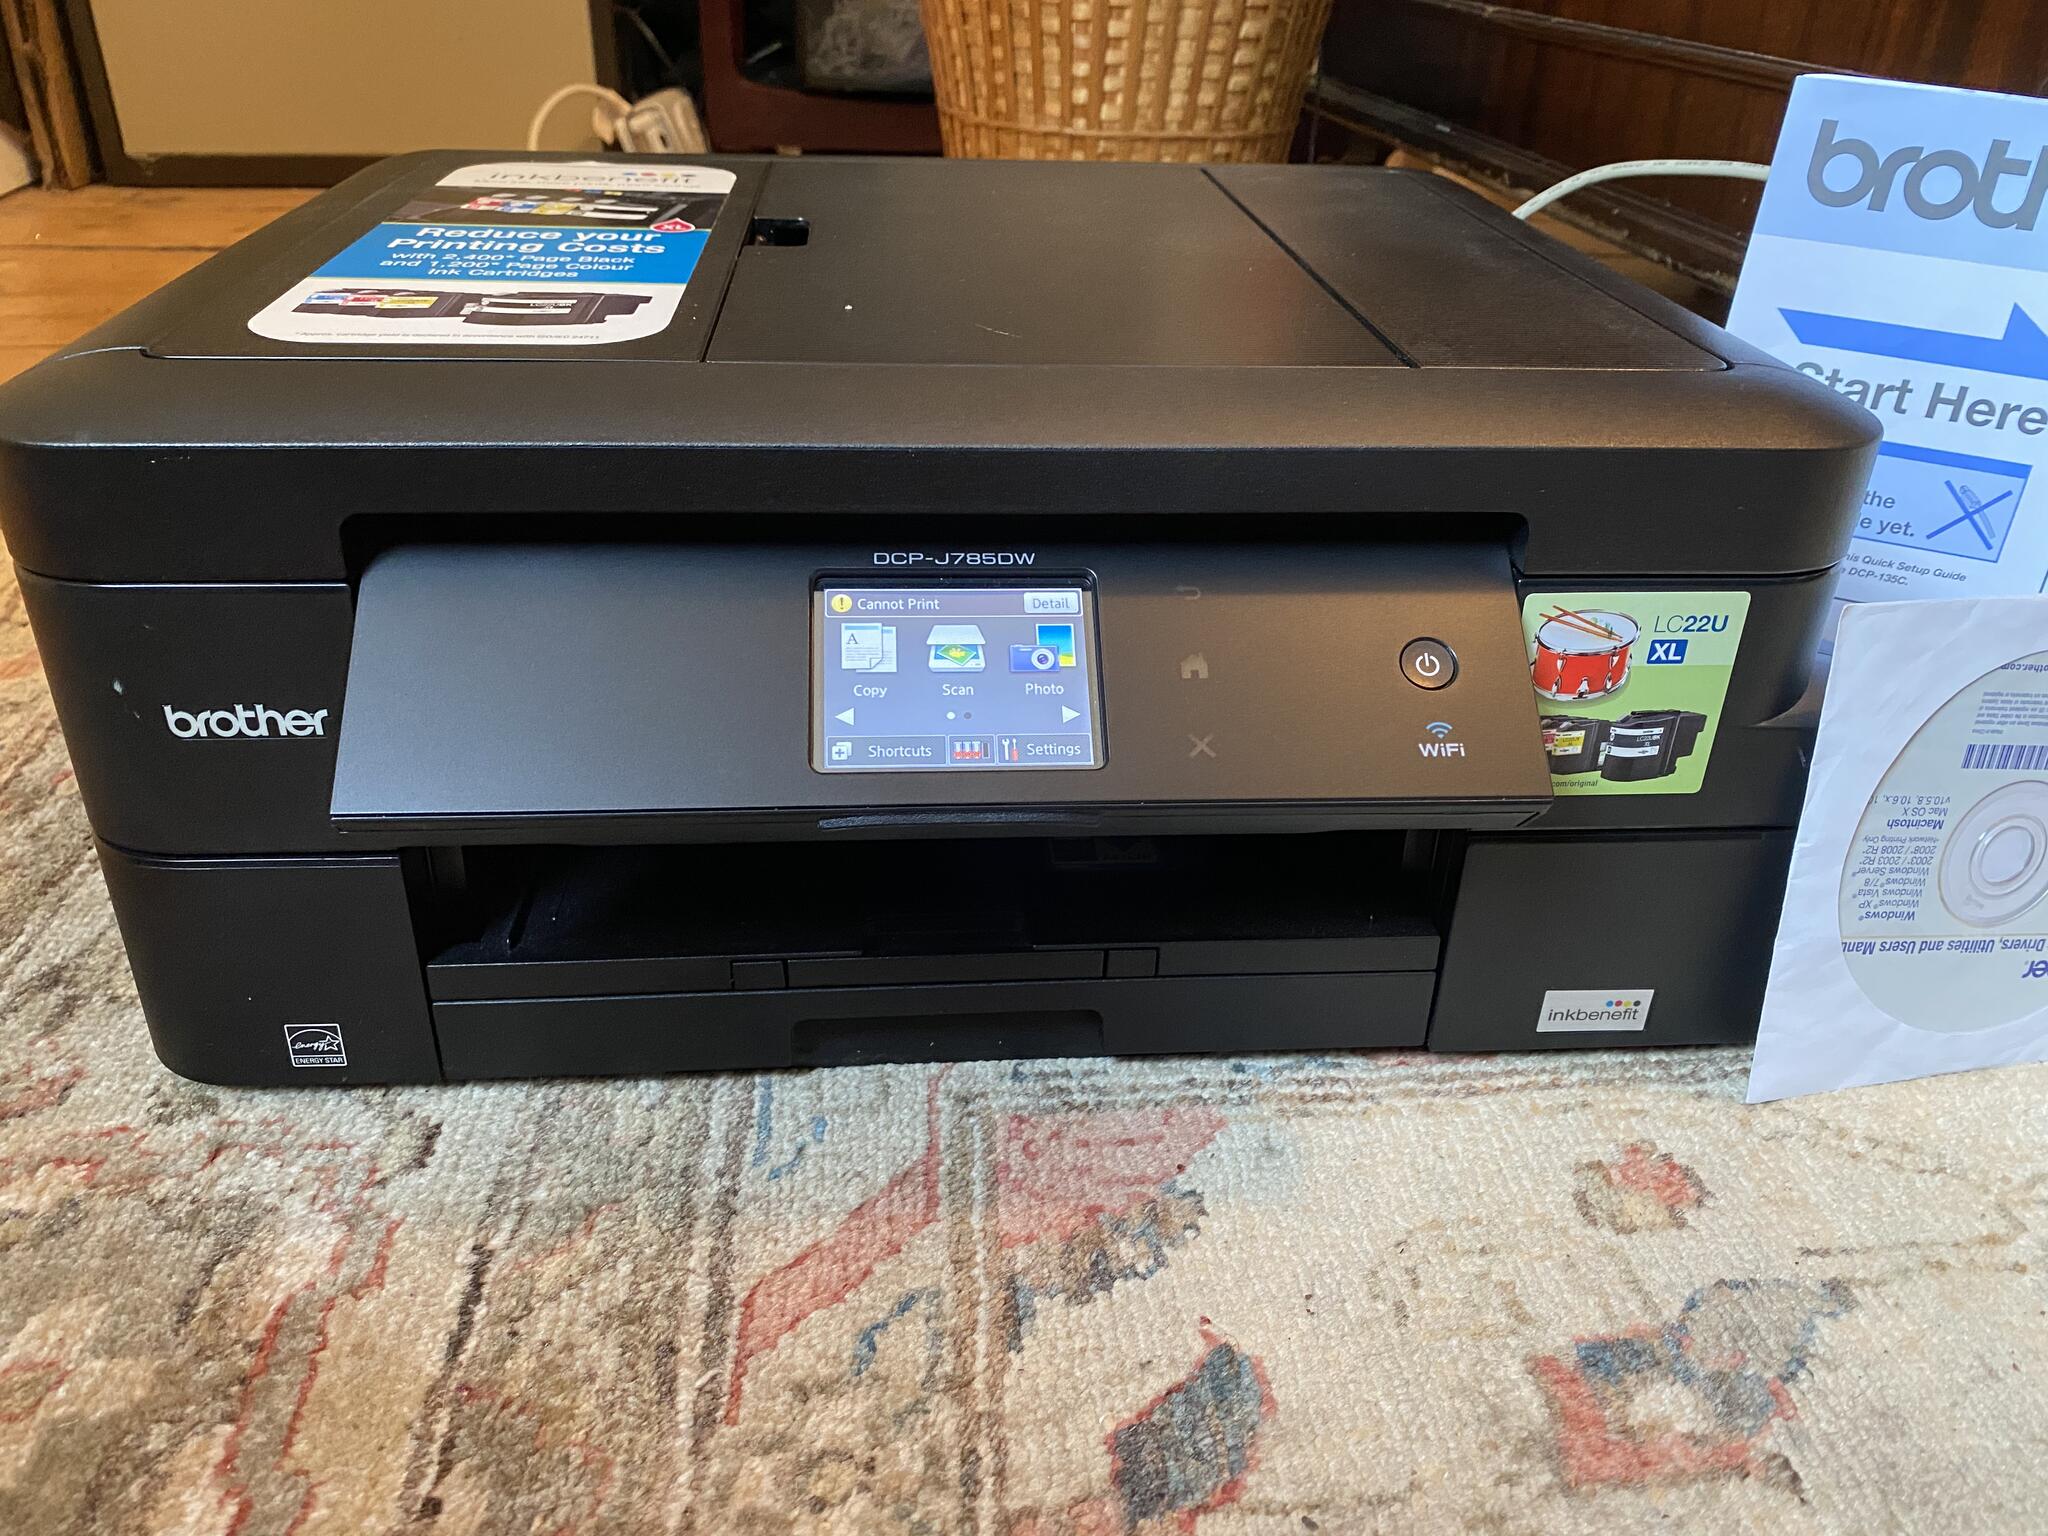 Ritual ægtefælle Taiko mave Brother Printer DCP-J785DW For £6 In Ringmer, Engl& | For Sale & Free —  Nextdoor